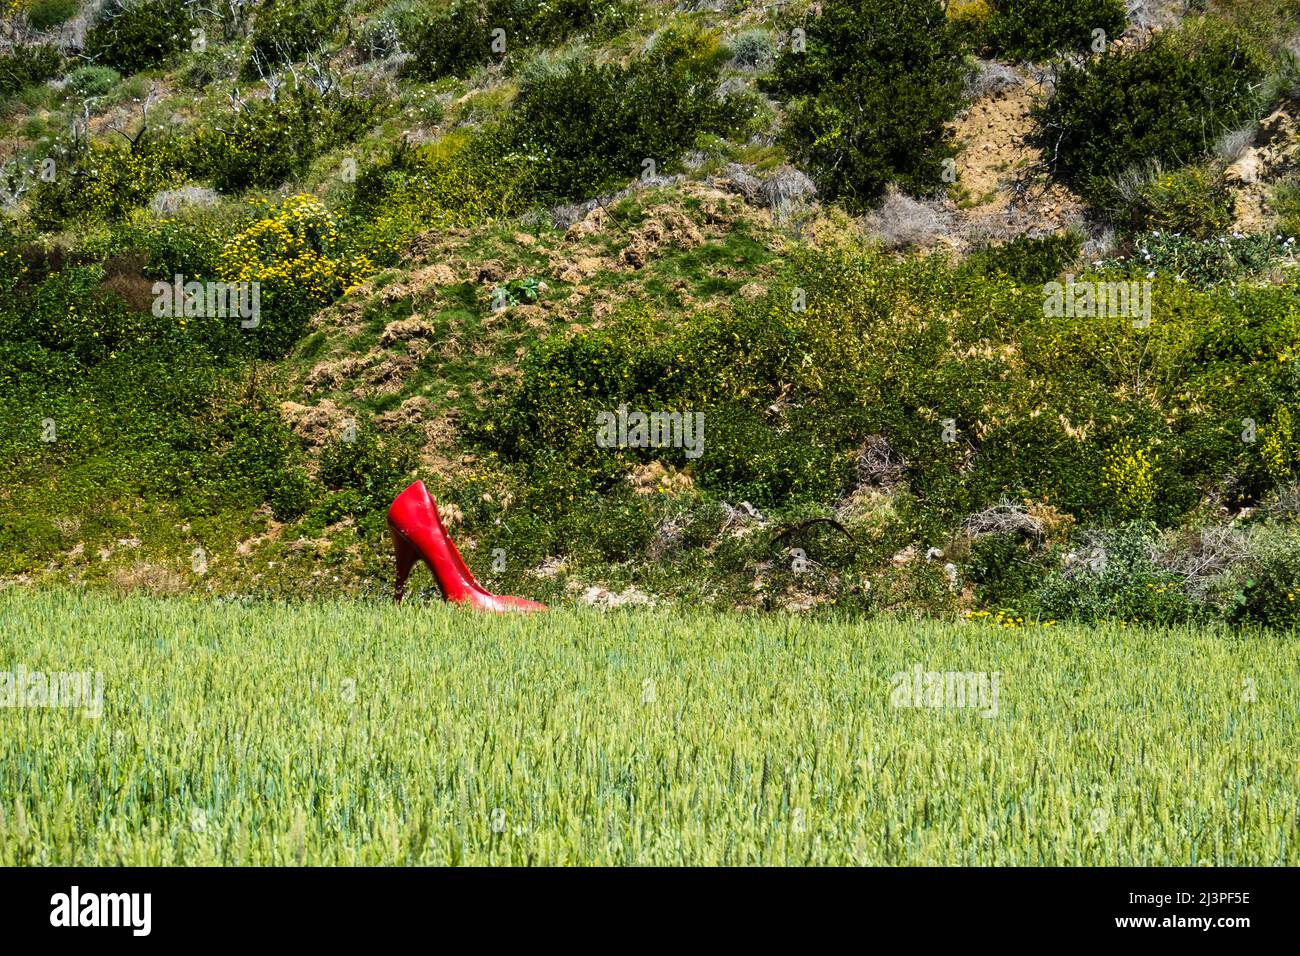 A red, larger than life, stiletto heel woman's shoe art installation in an agrarian landscape in Santa Barbara County, California. Stock Photo